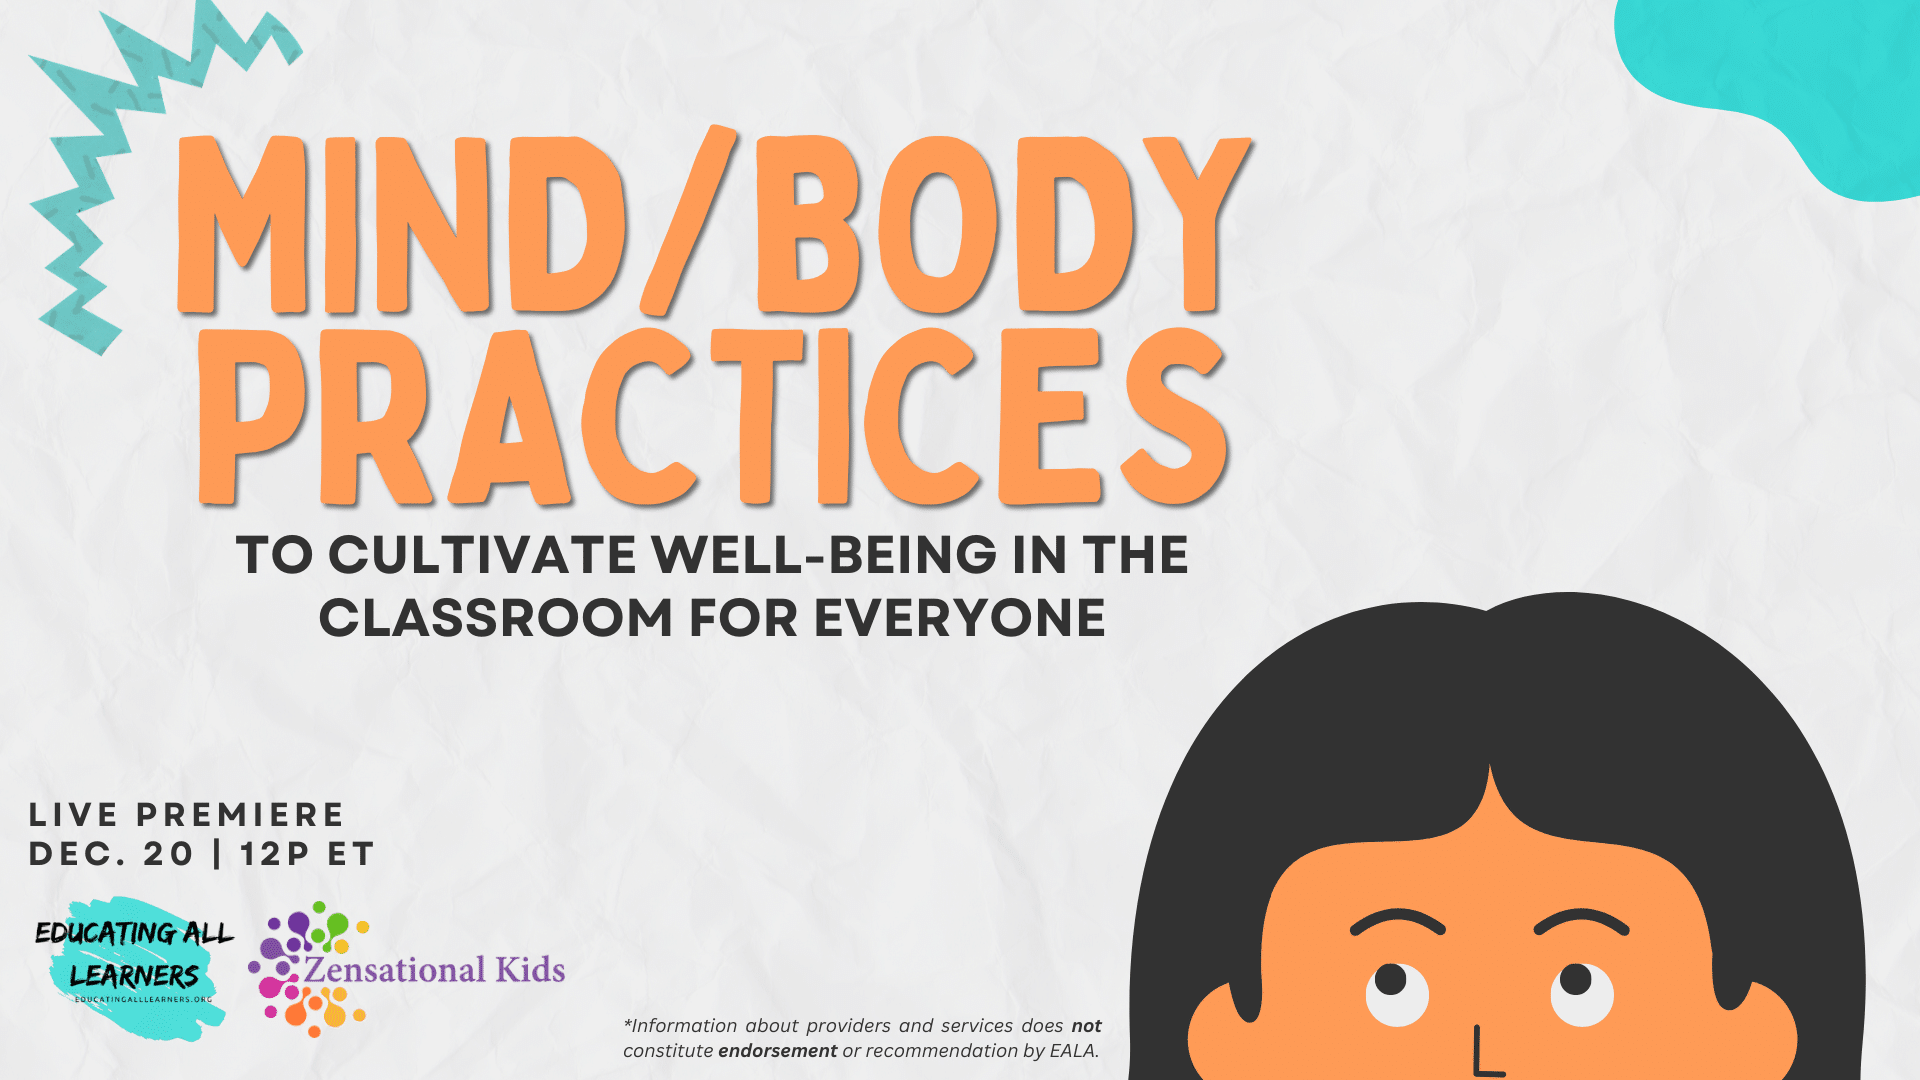 Mind/Body practices to cultivate well being in the classroom for everyone